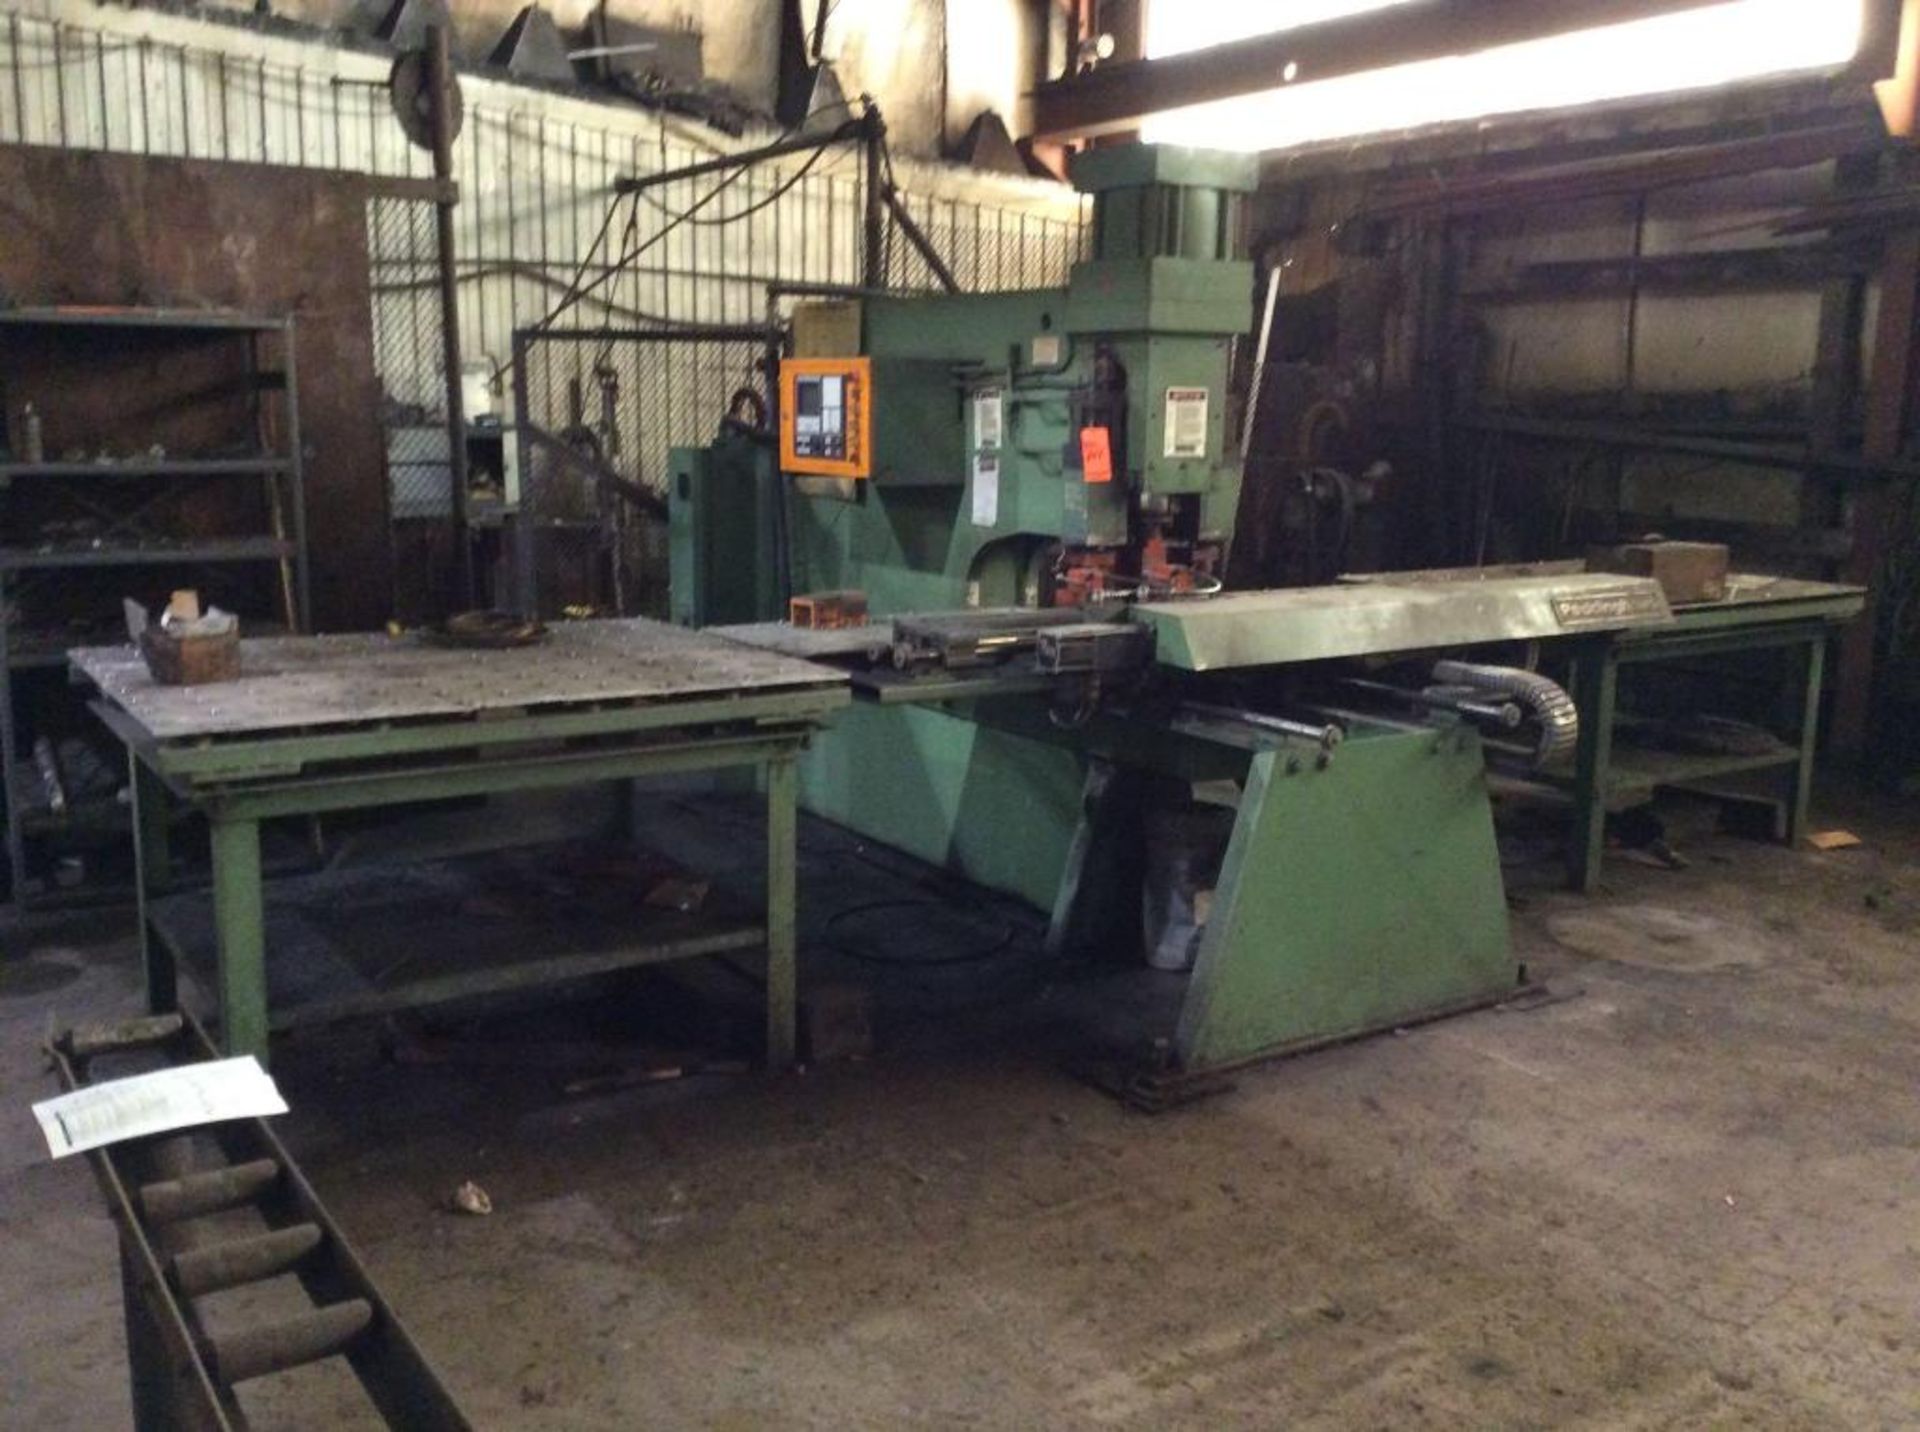 Peddinghaus F-1154-30R single head punch press with Fagor CNC controls and twin roller tables